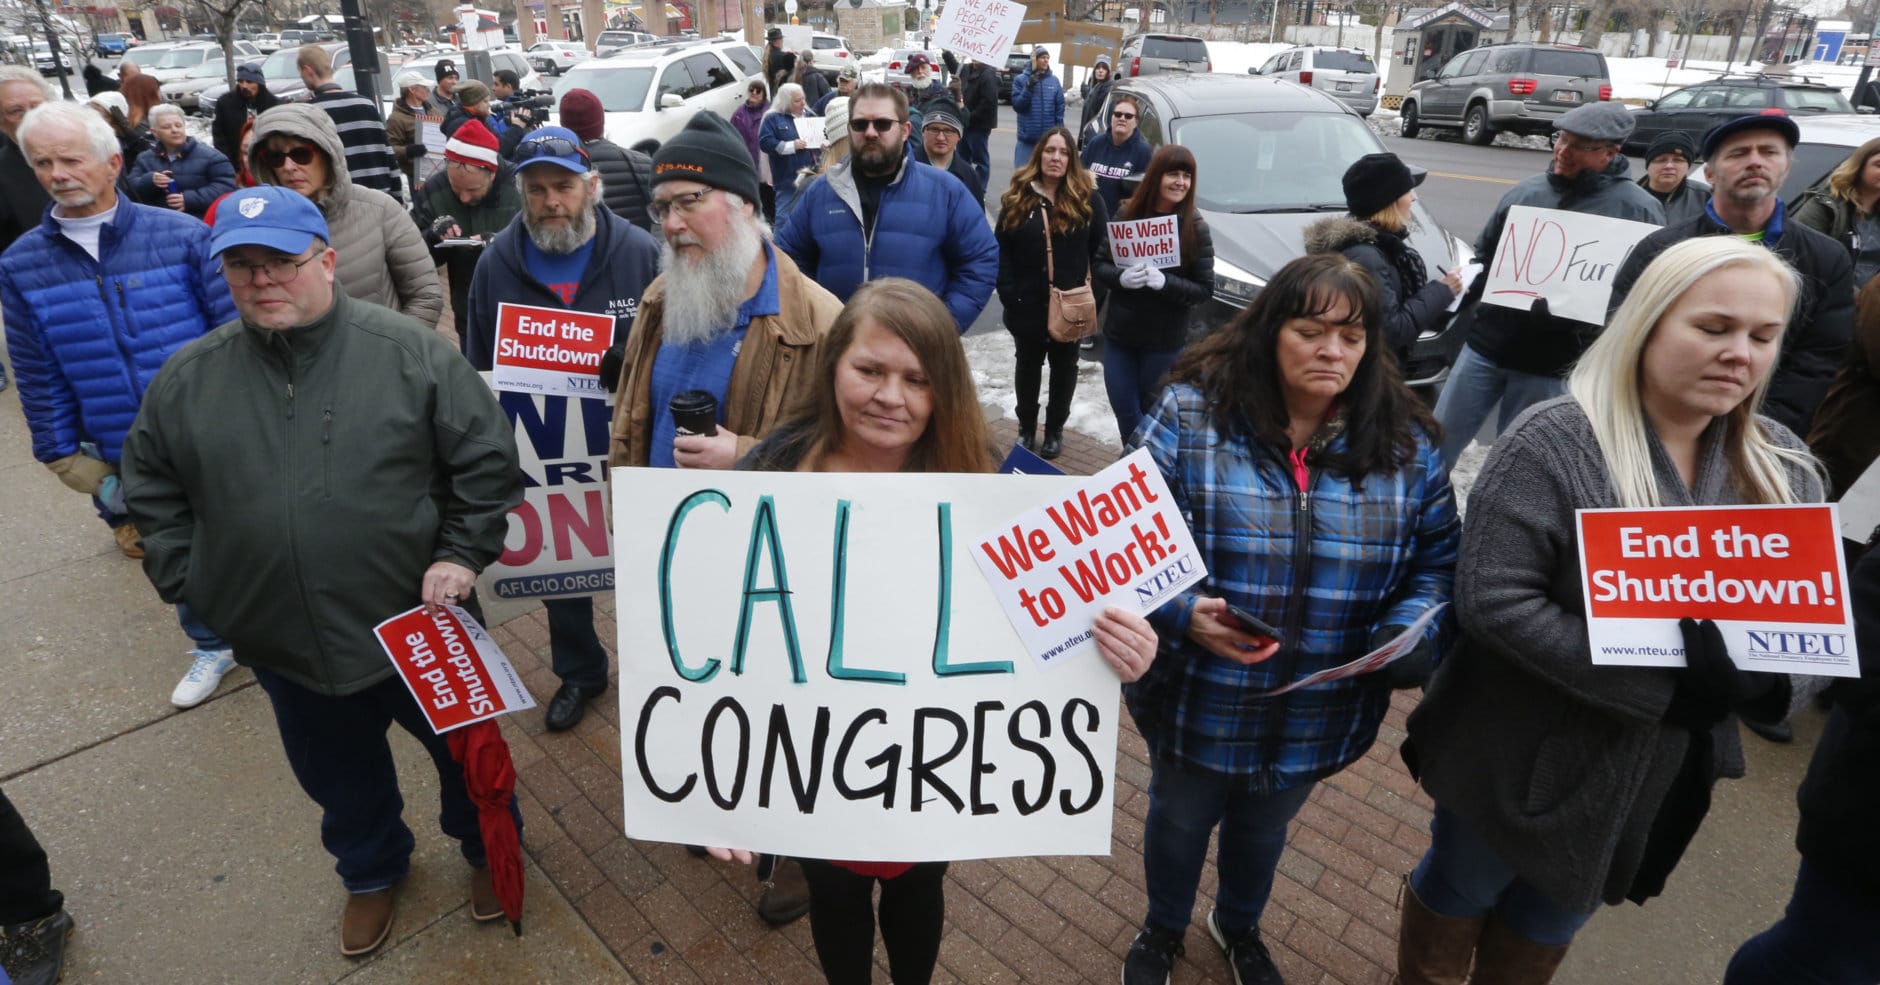 IRS worker Angela Gran, center, and others participate in a federal workers protest rally outside the Federal Building, Thursday, Jan., 10, 2019, in Ogden, Utah. Payday will come Friday without any checks for about 800,000 federal employees affected by the government shutdown, forcing workers to scale back spending, cancel trips, apply for unemployment benefits and take out loans to stay afloat. (AP Photo/Rick Bowmer)